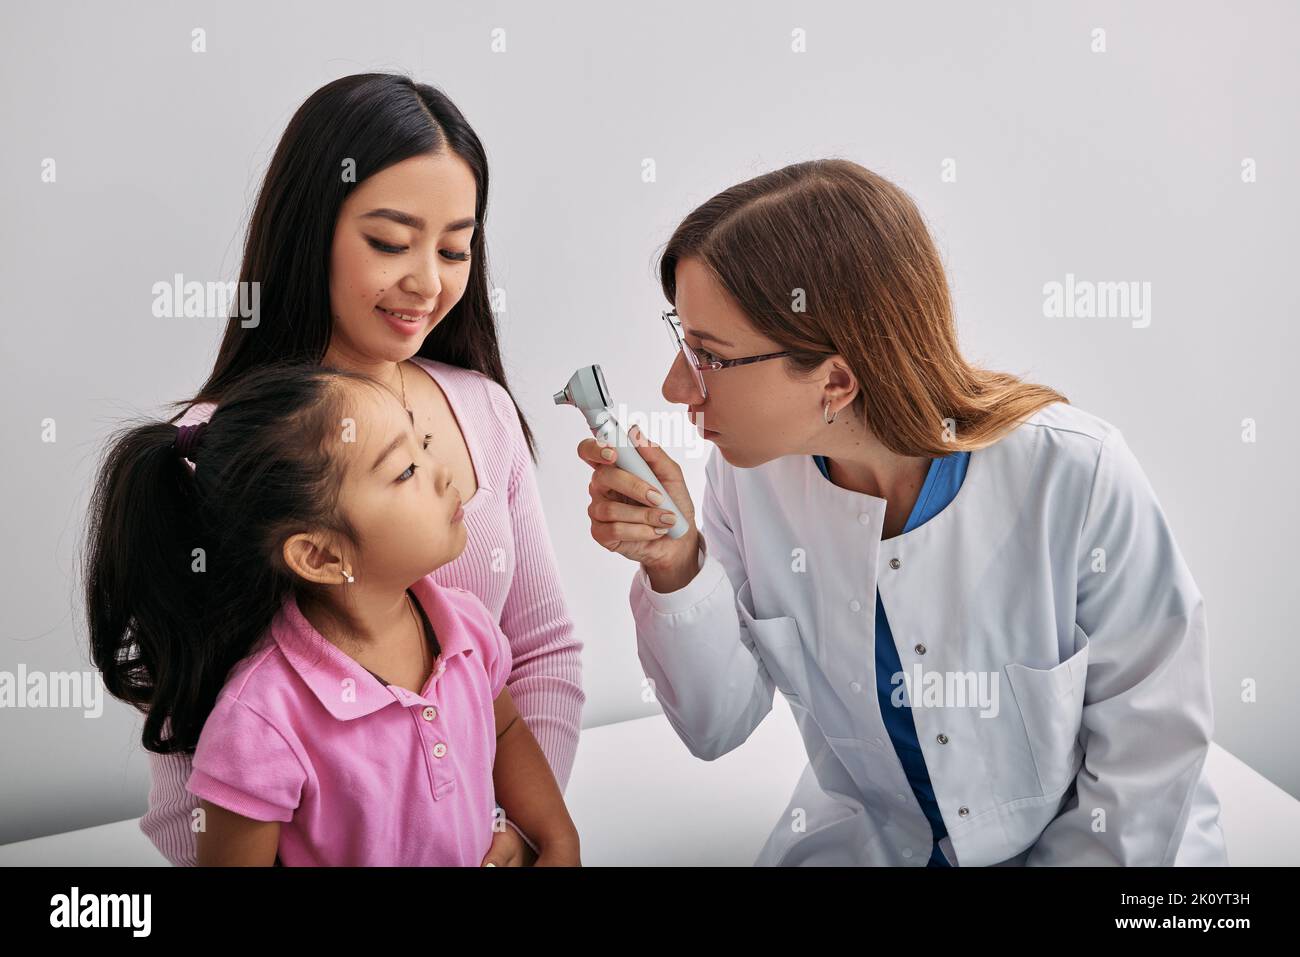 Doctor ophthalmologist using ophthalmoscope looking into eyes of Asian little girl who is sitting next to her mother. Checking child's vision Stock Photo